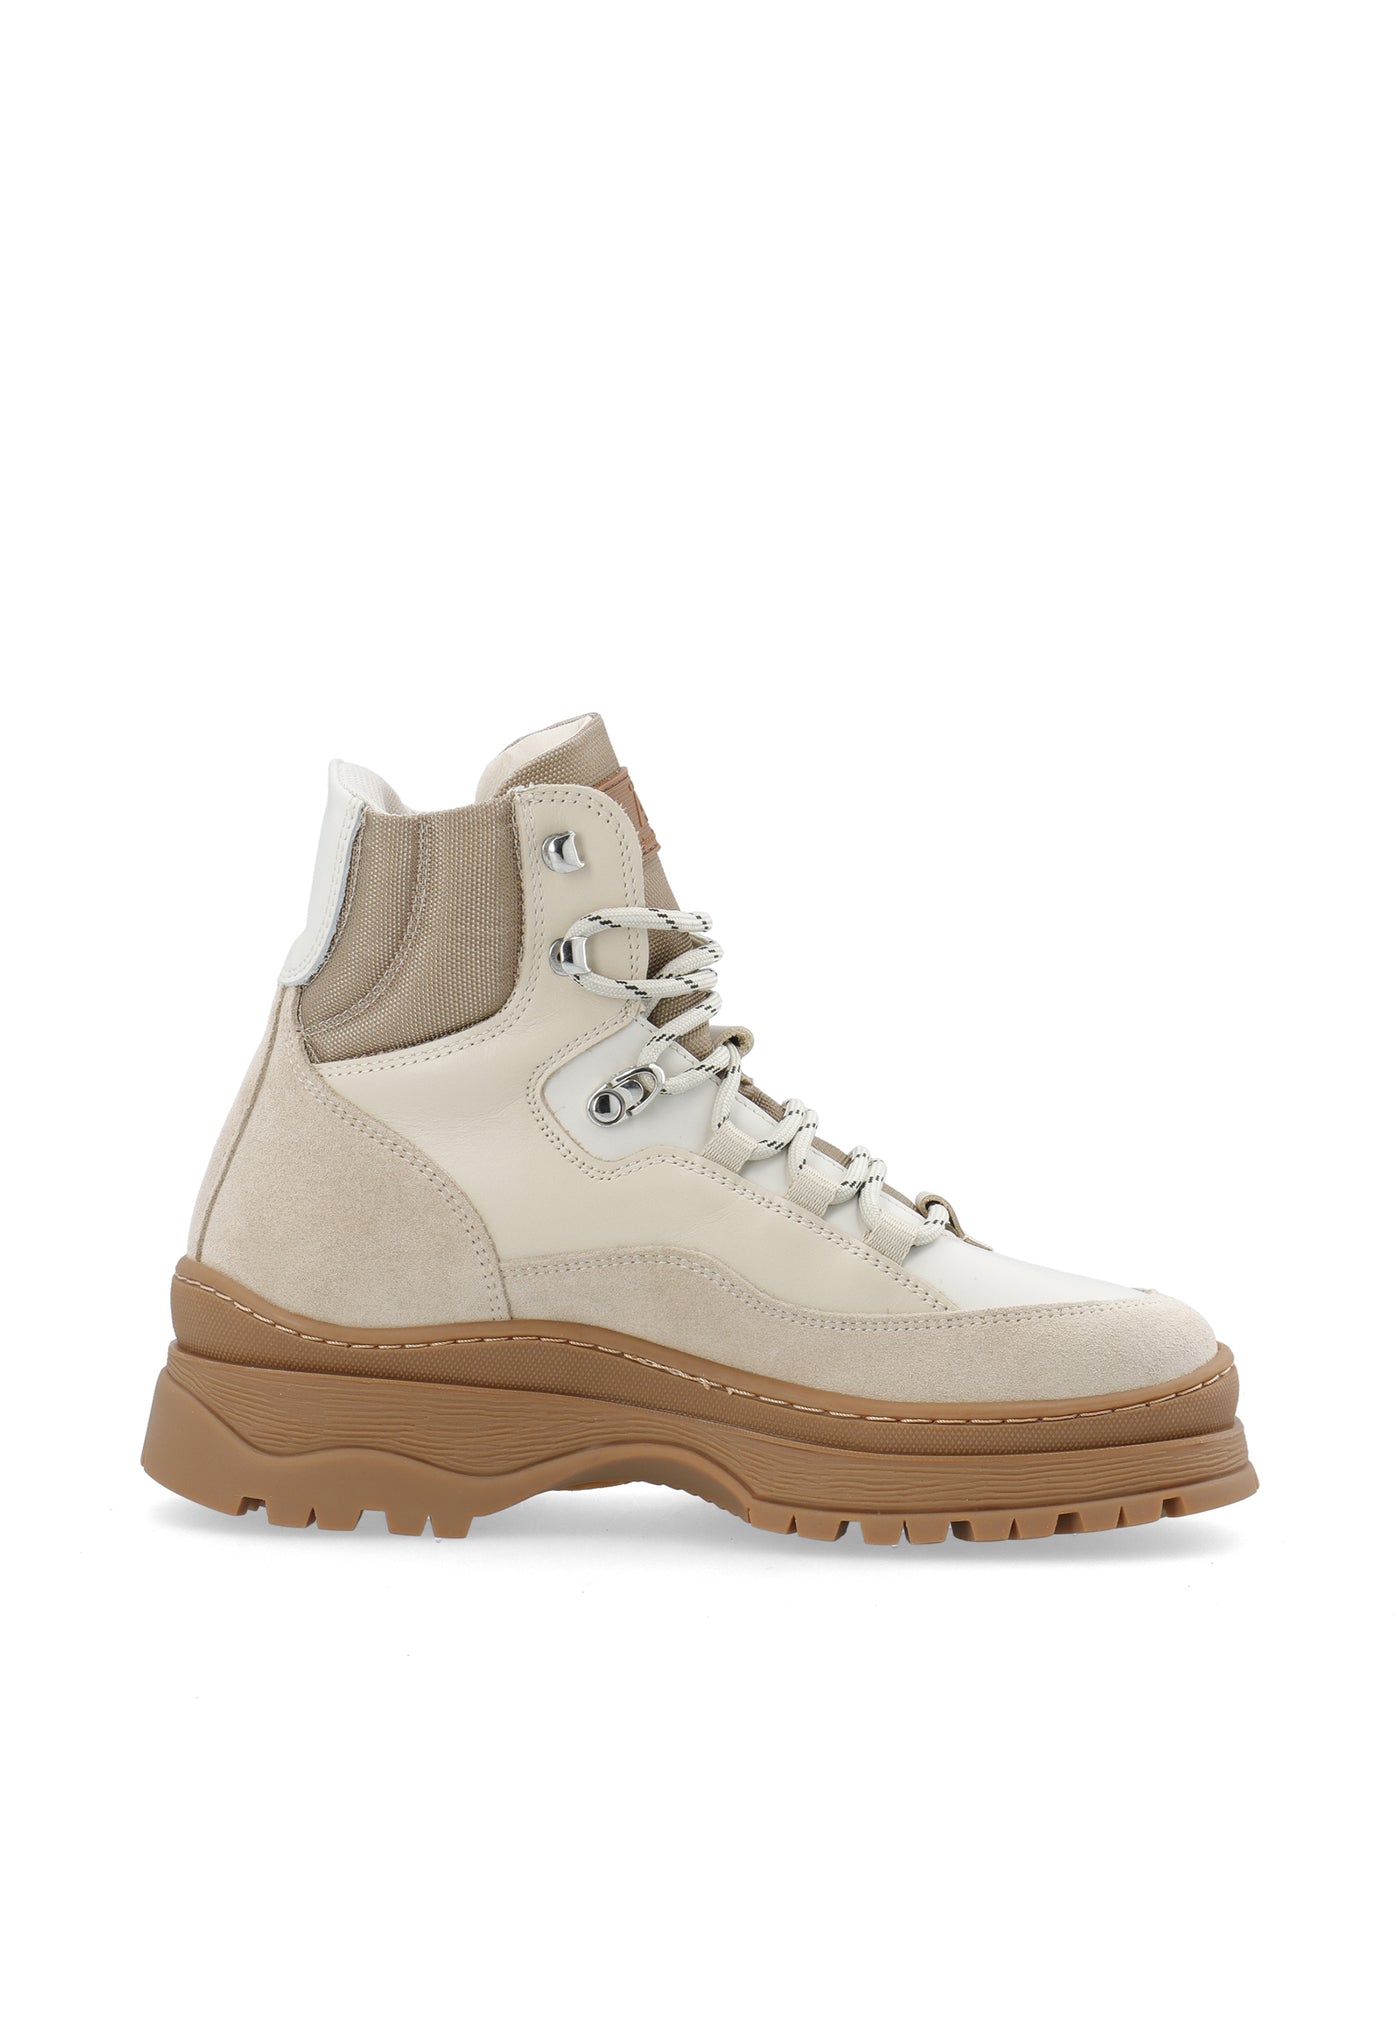 LÄST Downhill Lace-Up Boot Ankle Boots Beige